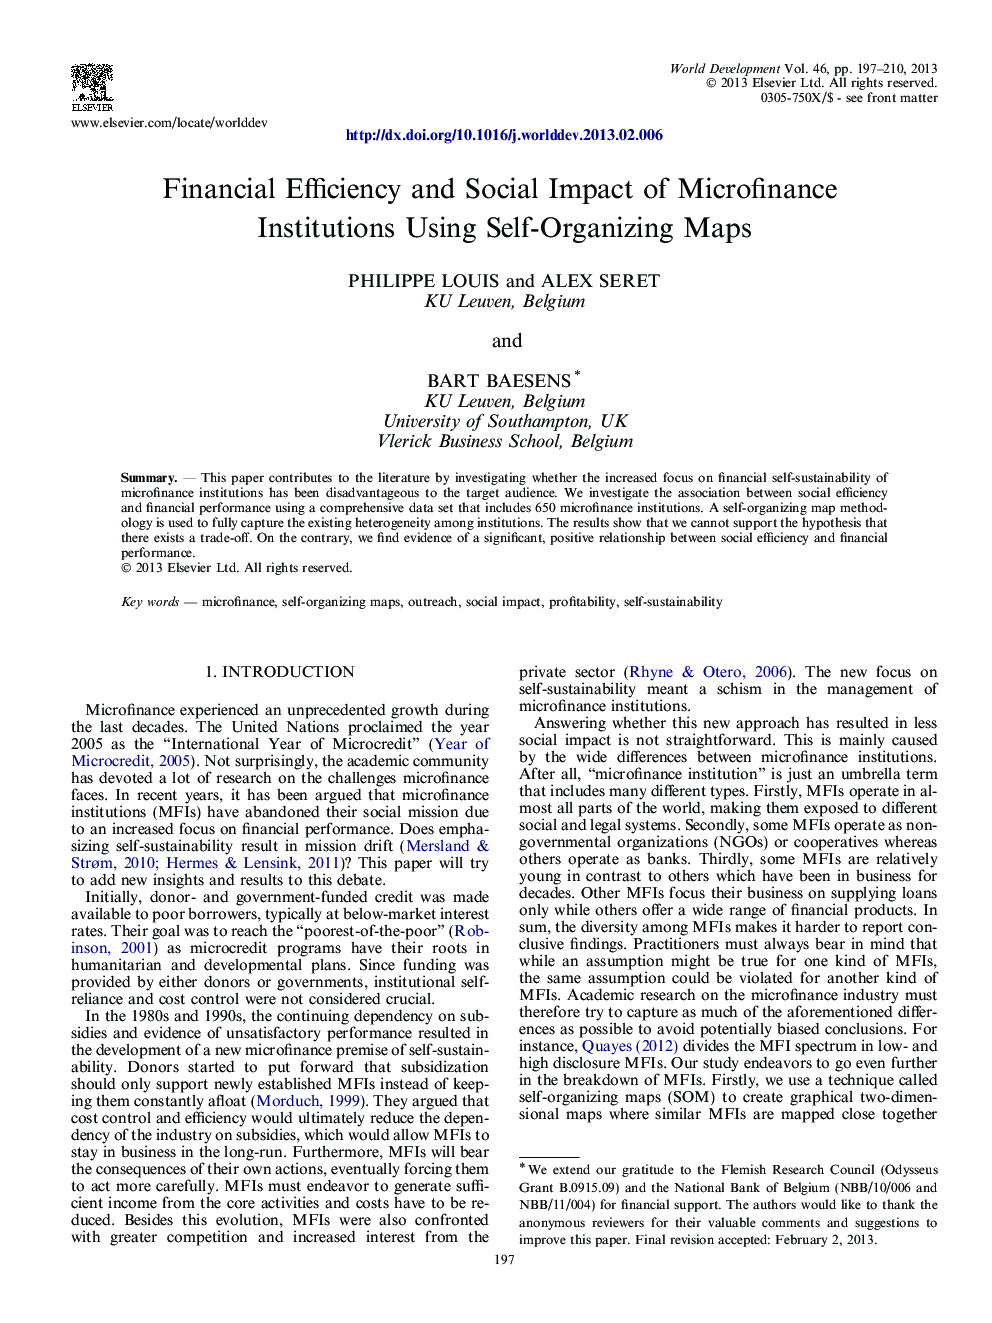 Financial Efficiency and Social Impact of Microfinance Institutions Using Self-Organizing Maps